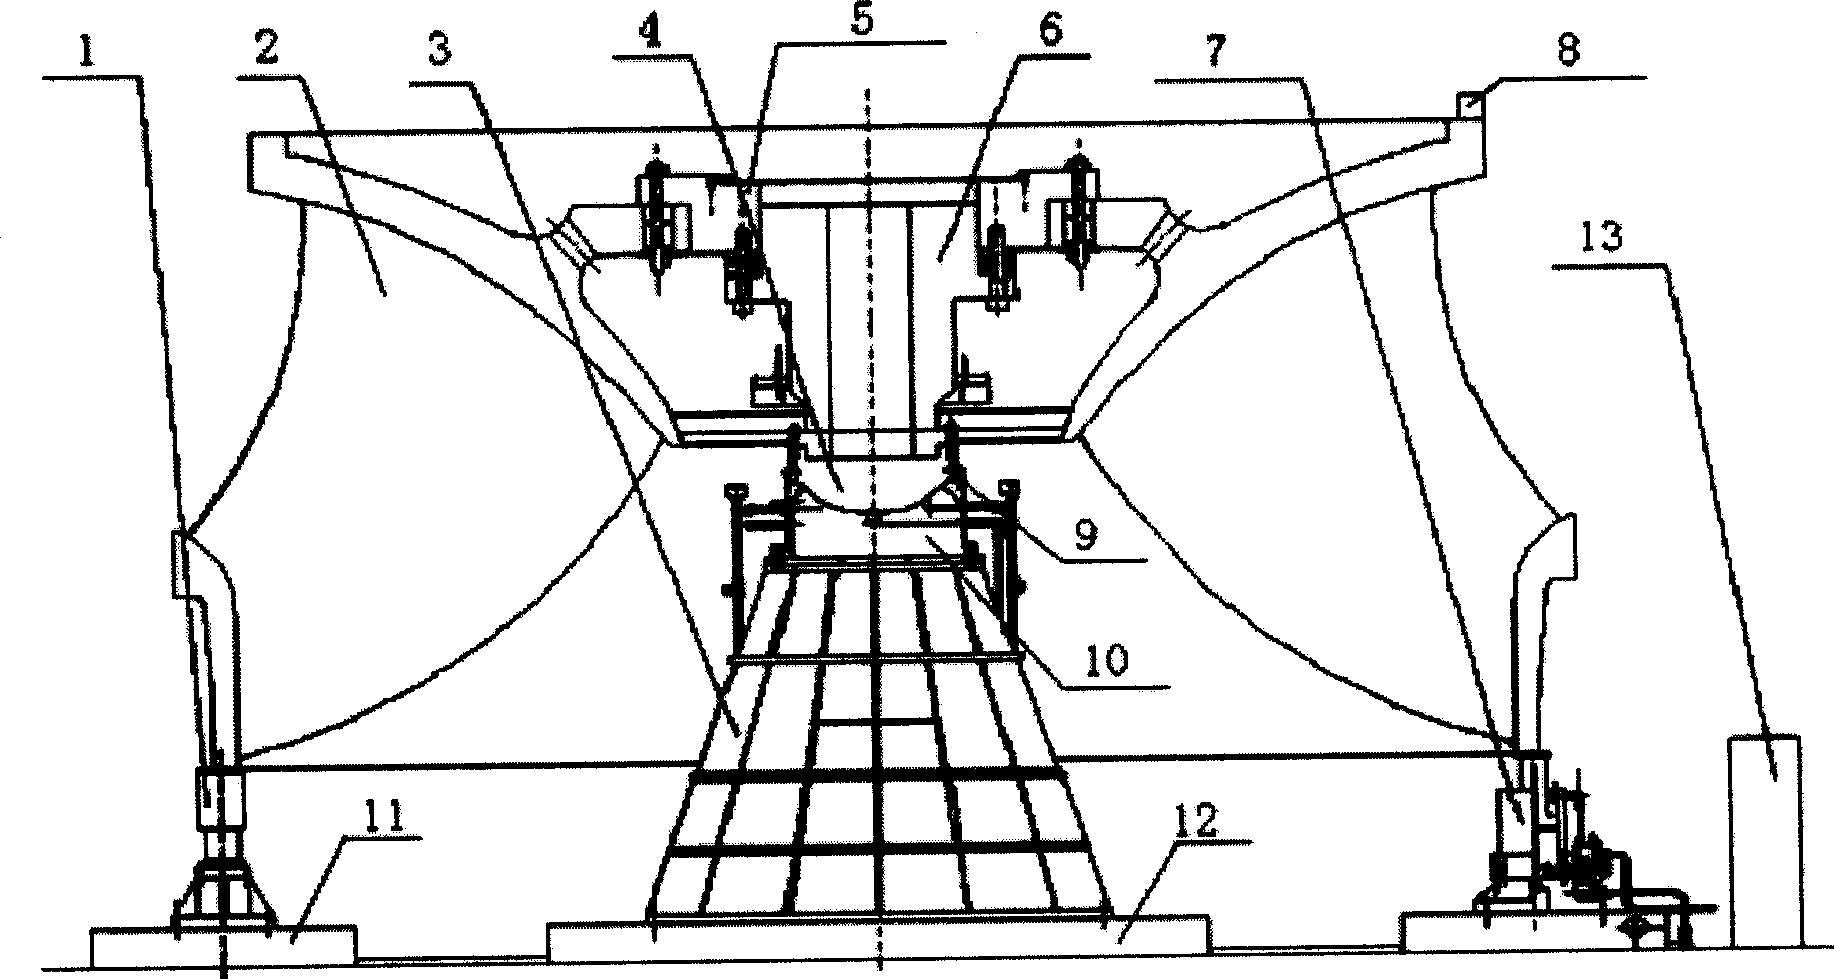 Rotor static pressure bearing balance technique for large mixed-flow turbine